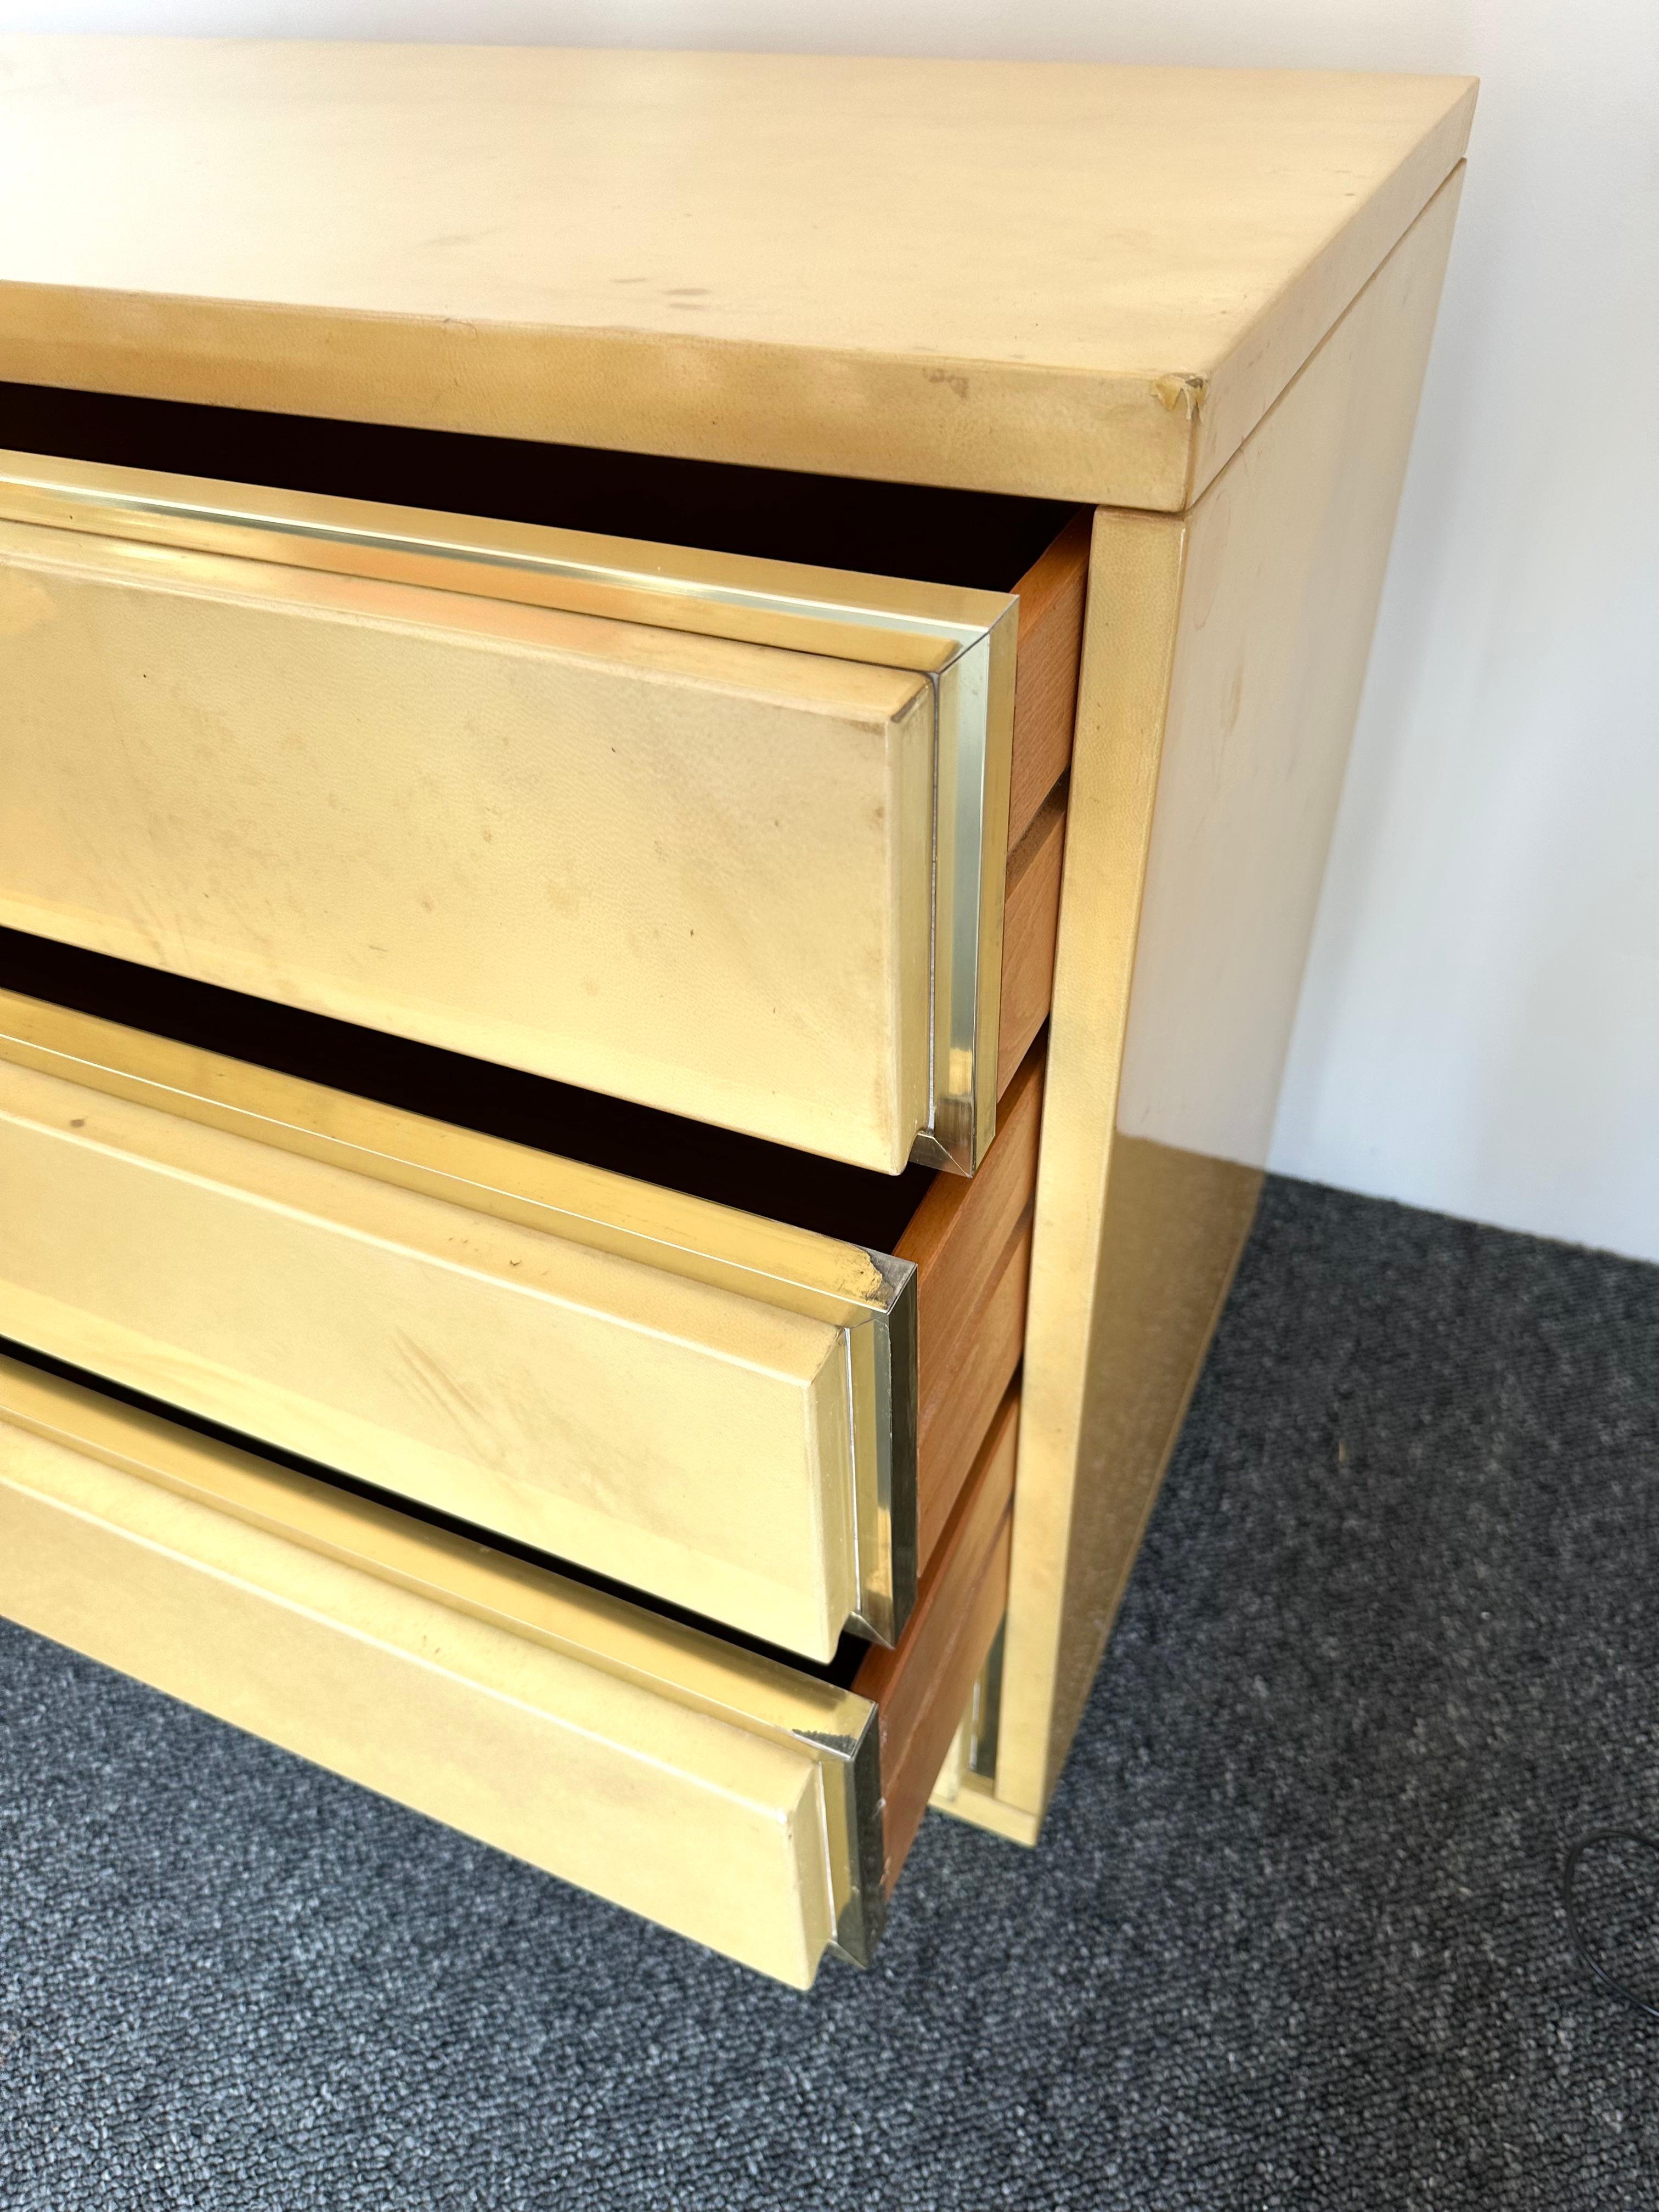 Chest of Drawers Lacquered Goatskin and Brass by Aldo Tura, Italy, 1970s For Sale 2